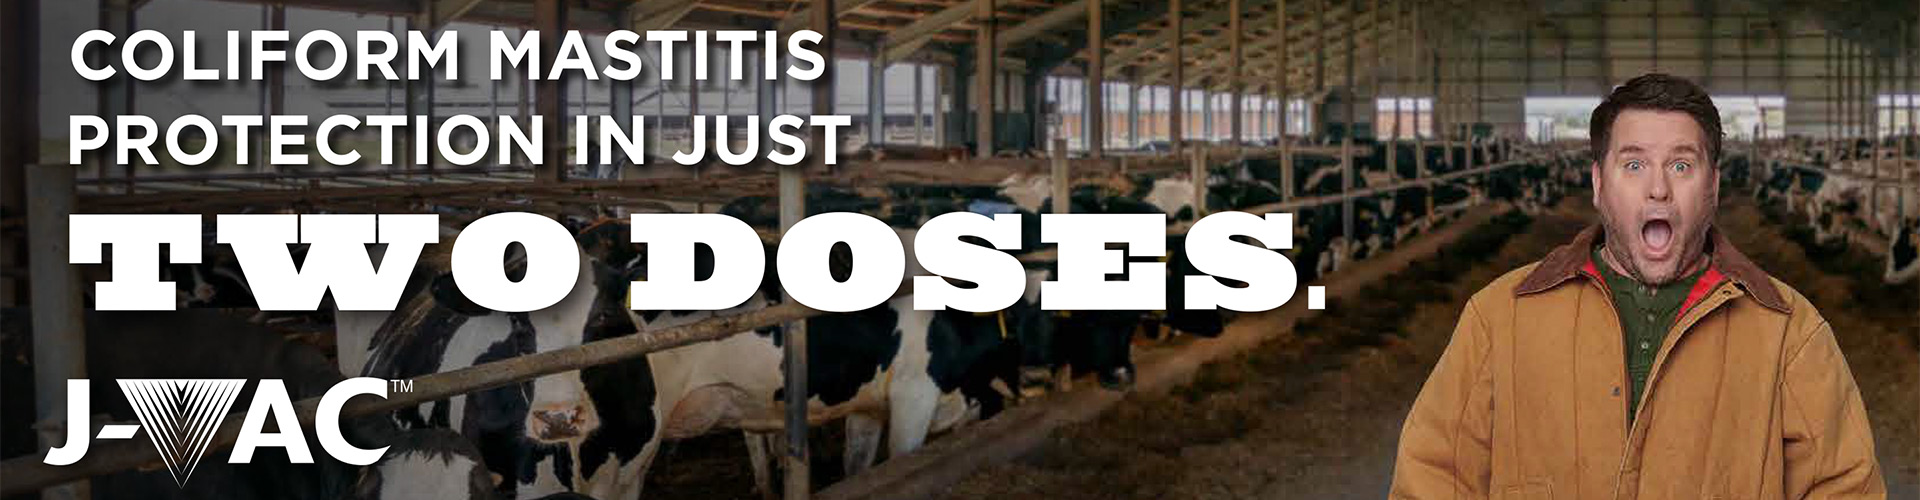 Coliform mastitis protection in just two doses